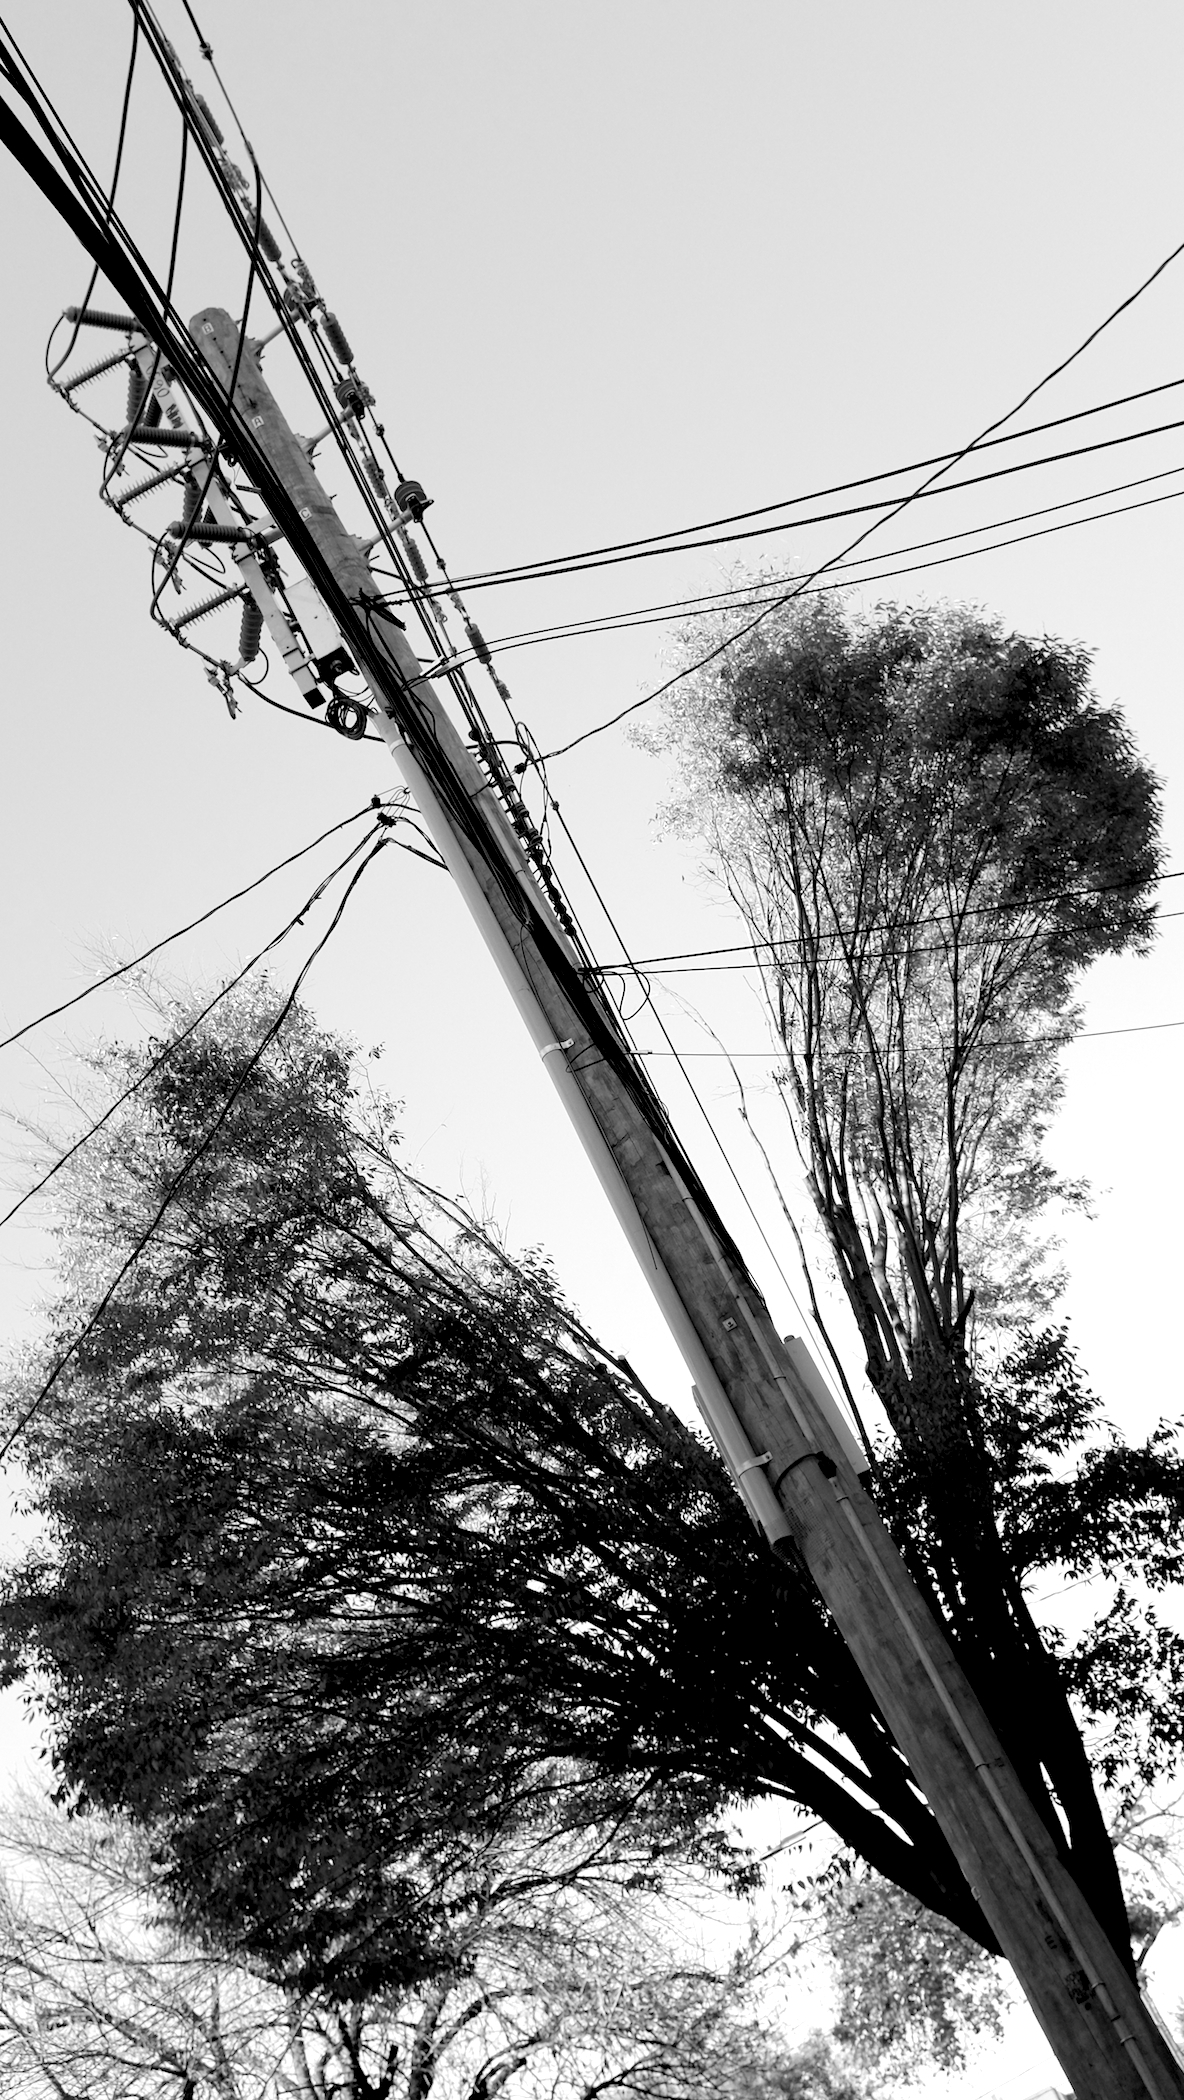 Trees and electric pole